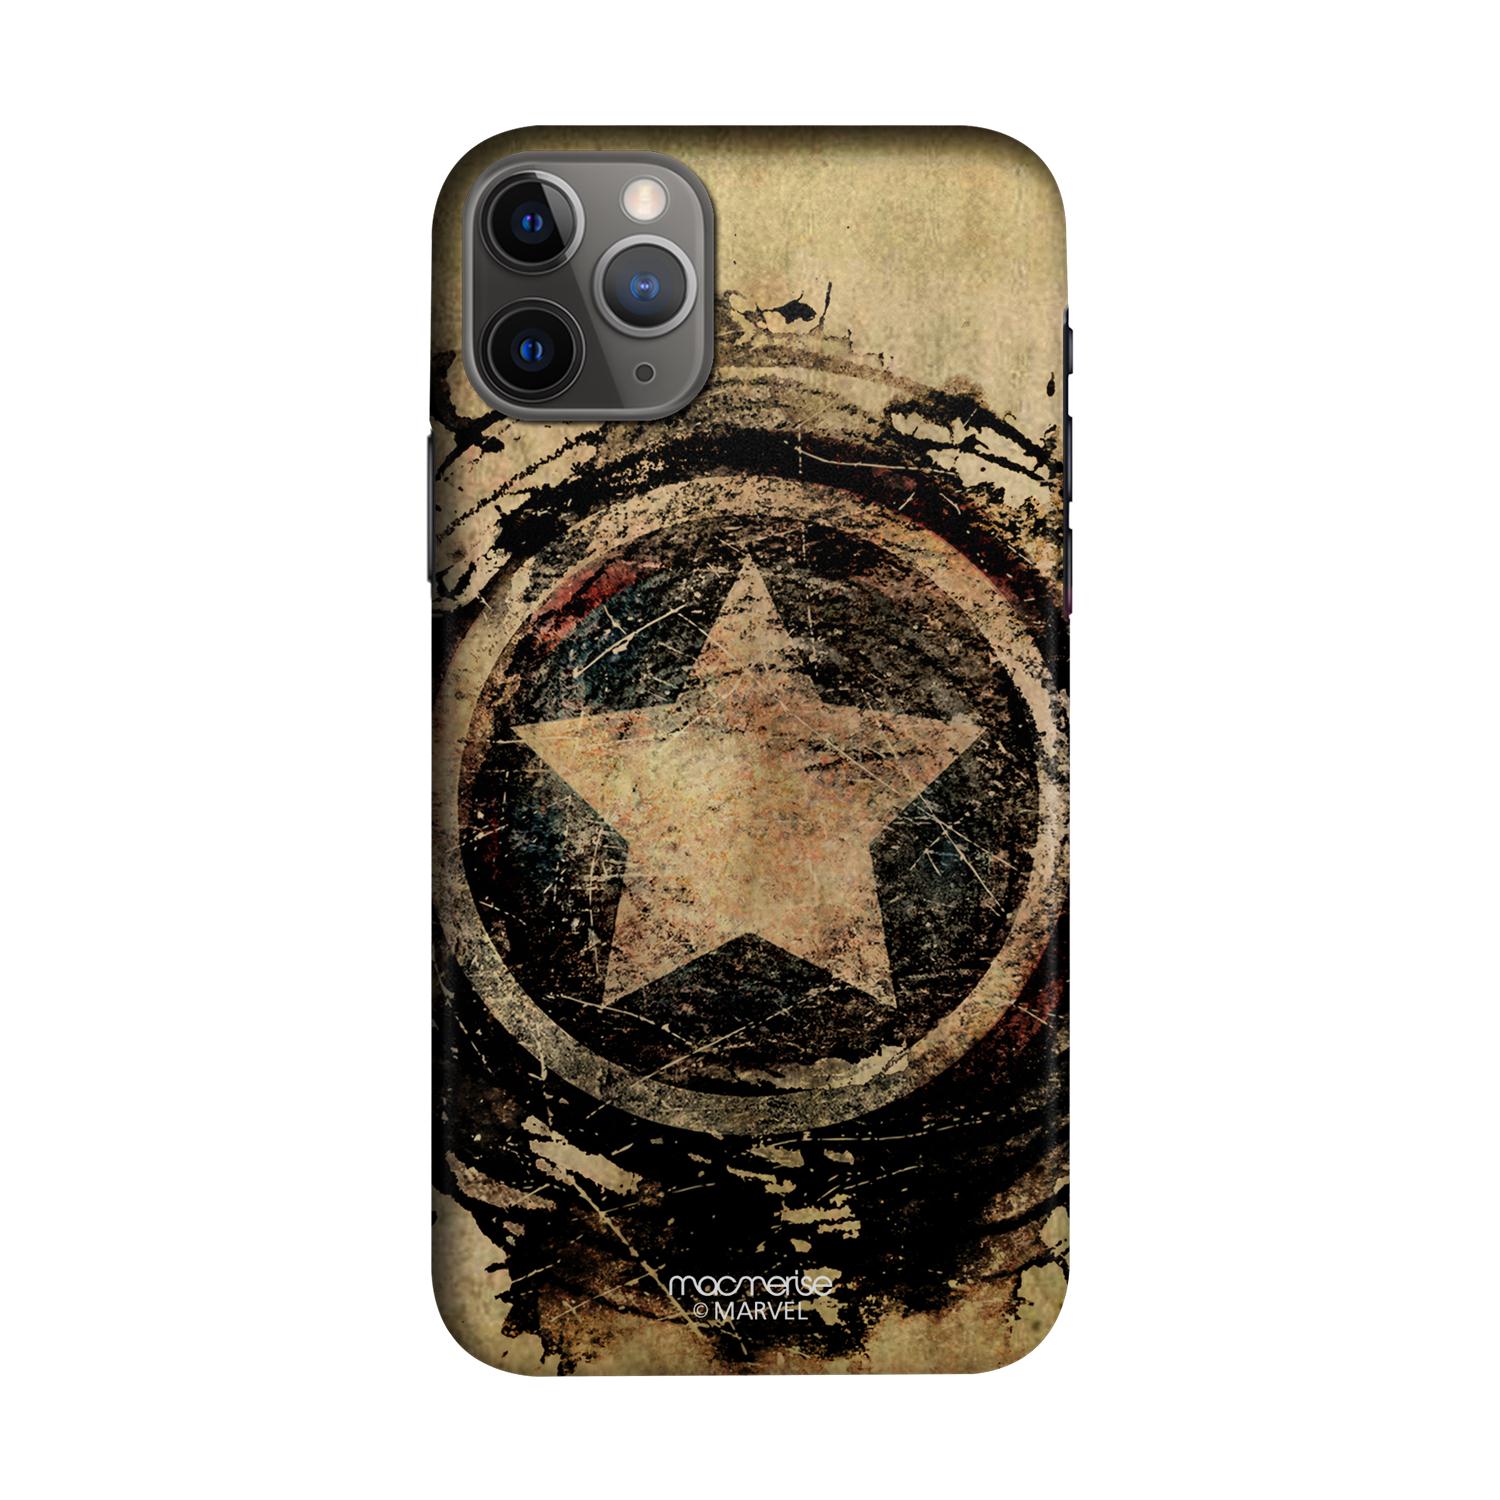 Buy Symbolic Captain Shield - Sleek Phone Case for iPhone 11 Pro Max Online